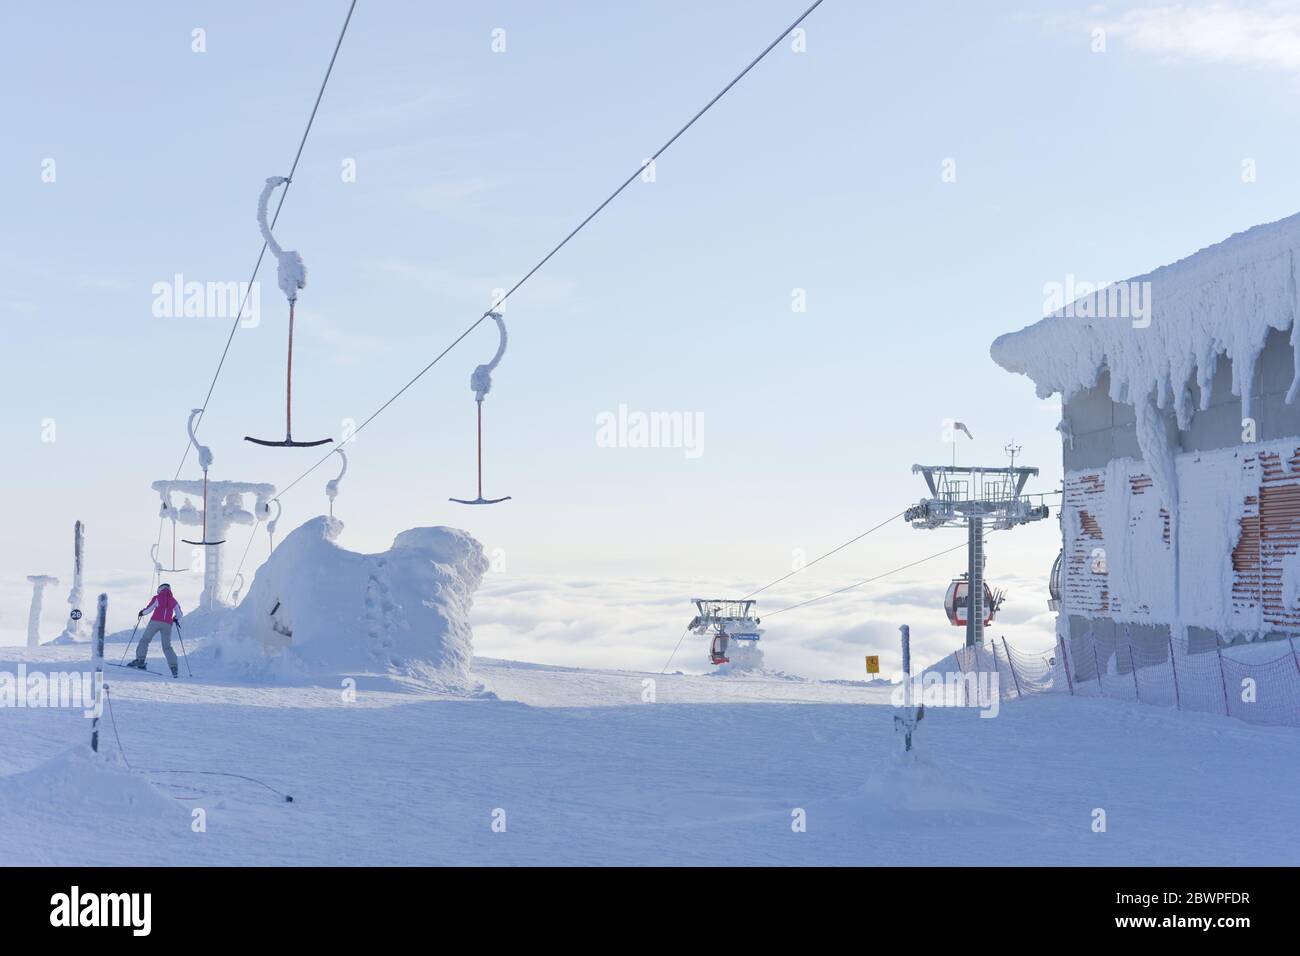 a single skier heads down a run having disembarked from ski lifts that rise up above the clouds into the pale blue sky. Very cold and snowy conditions Stock Photo